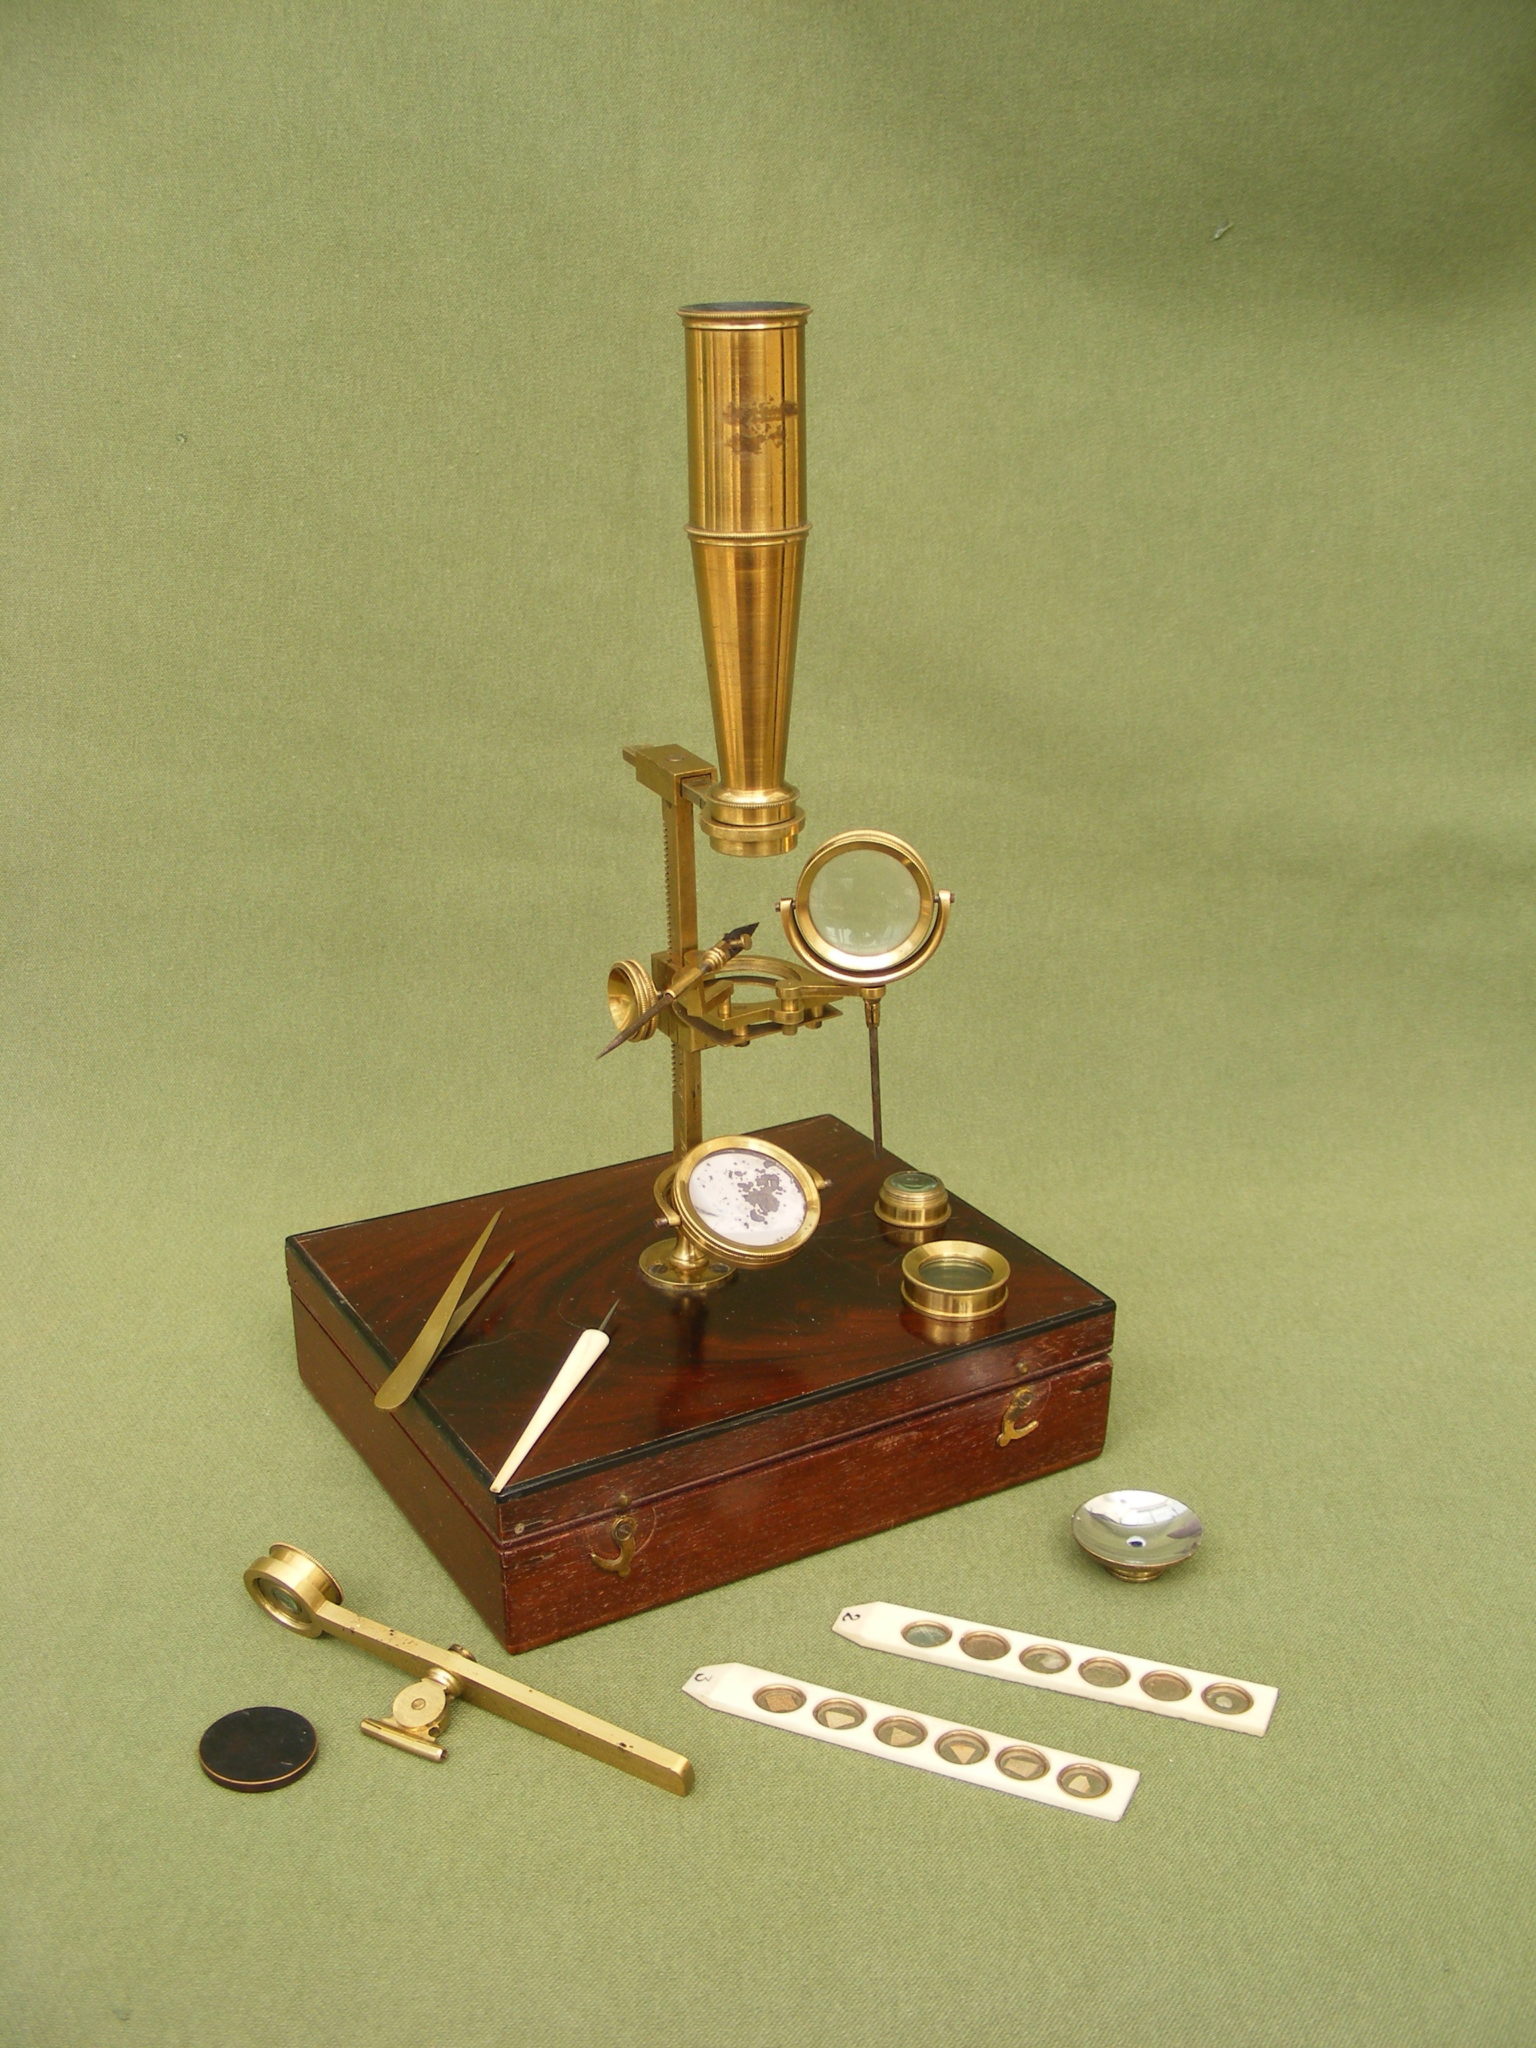 FINE COMPOUND & SIMPLE GOULD-TYPE MICROSCOPE BY CARY